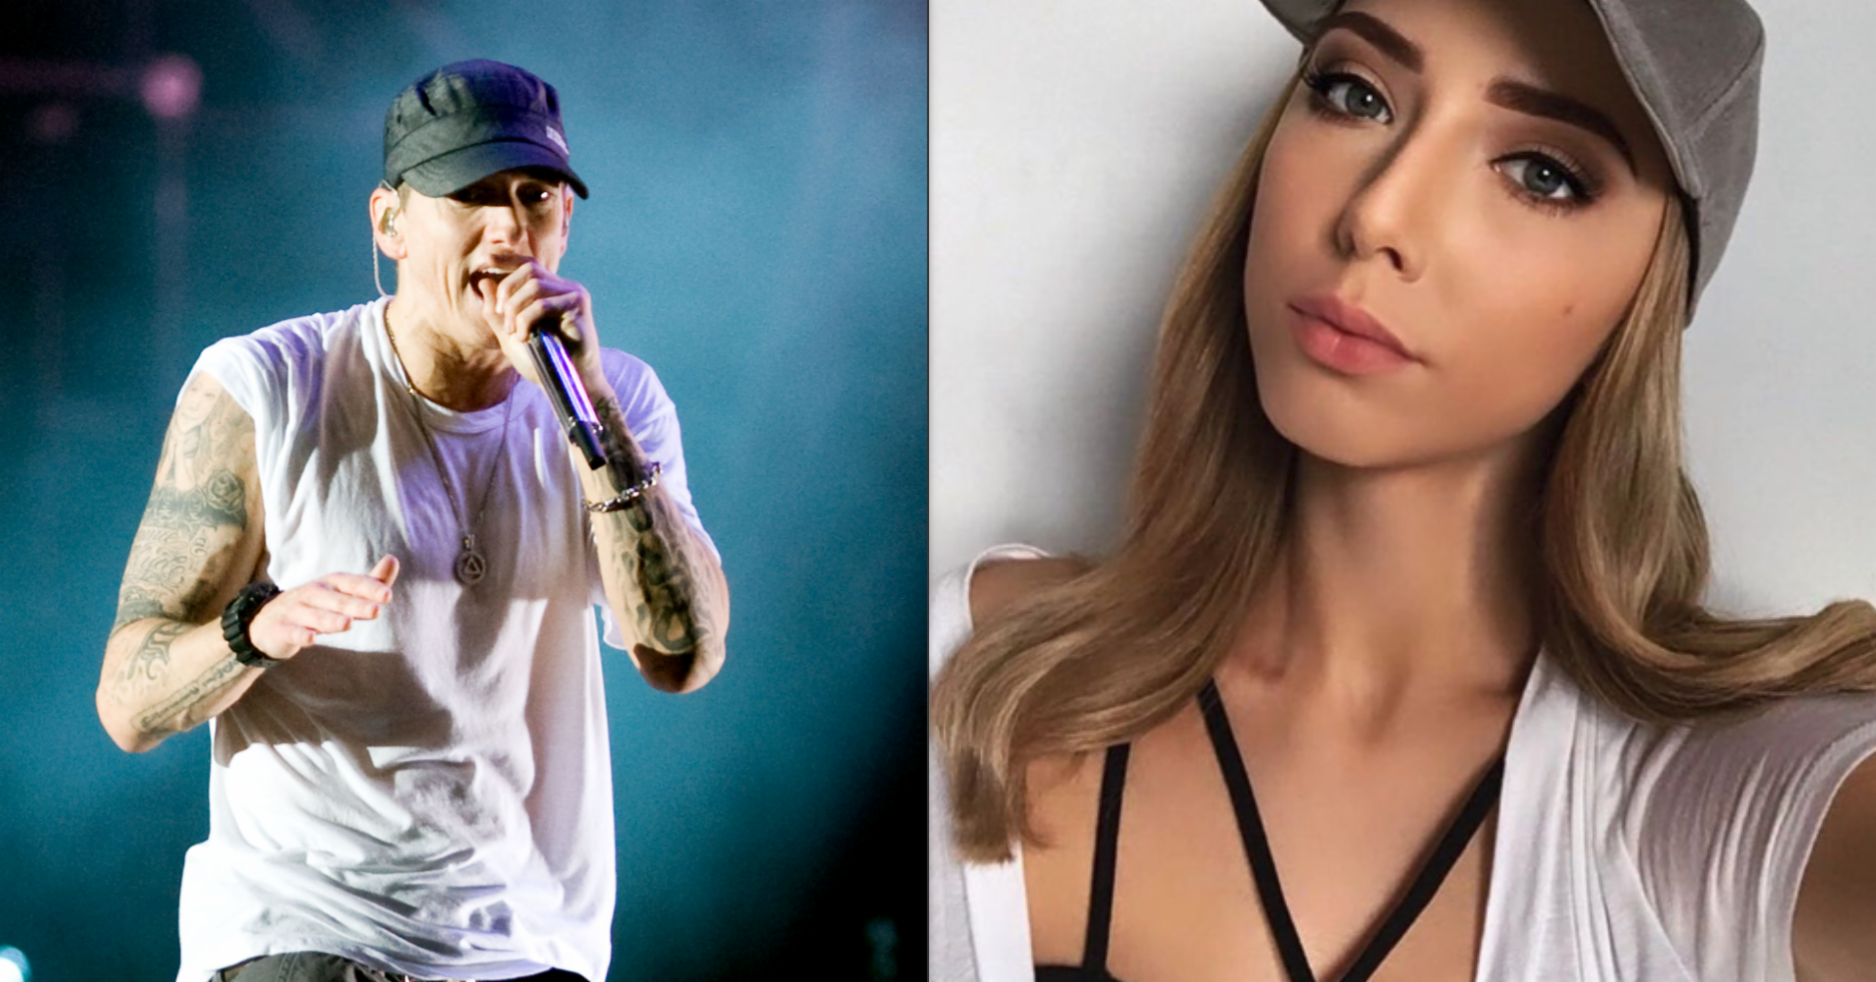 Eminem's Daughter Hailie is Now a Stunning College Student at Mich...